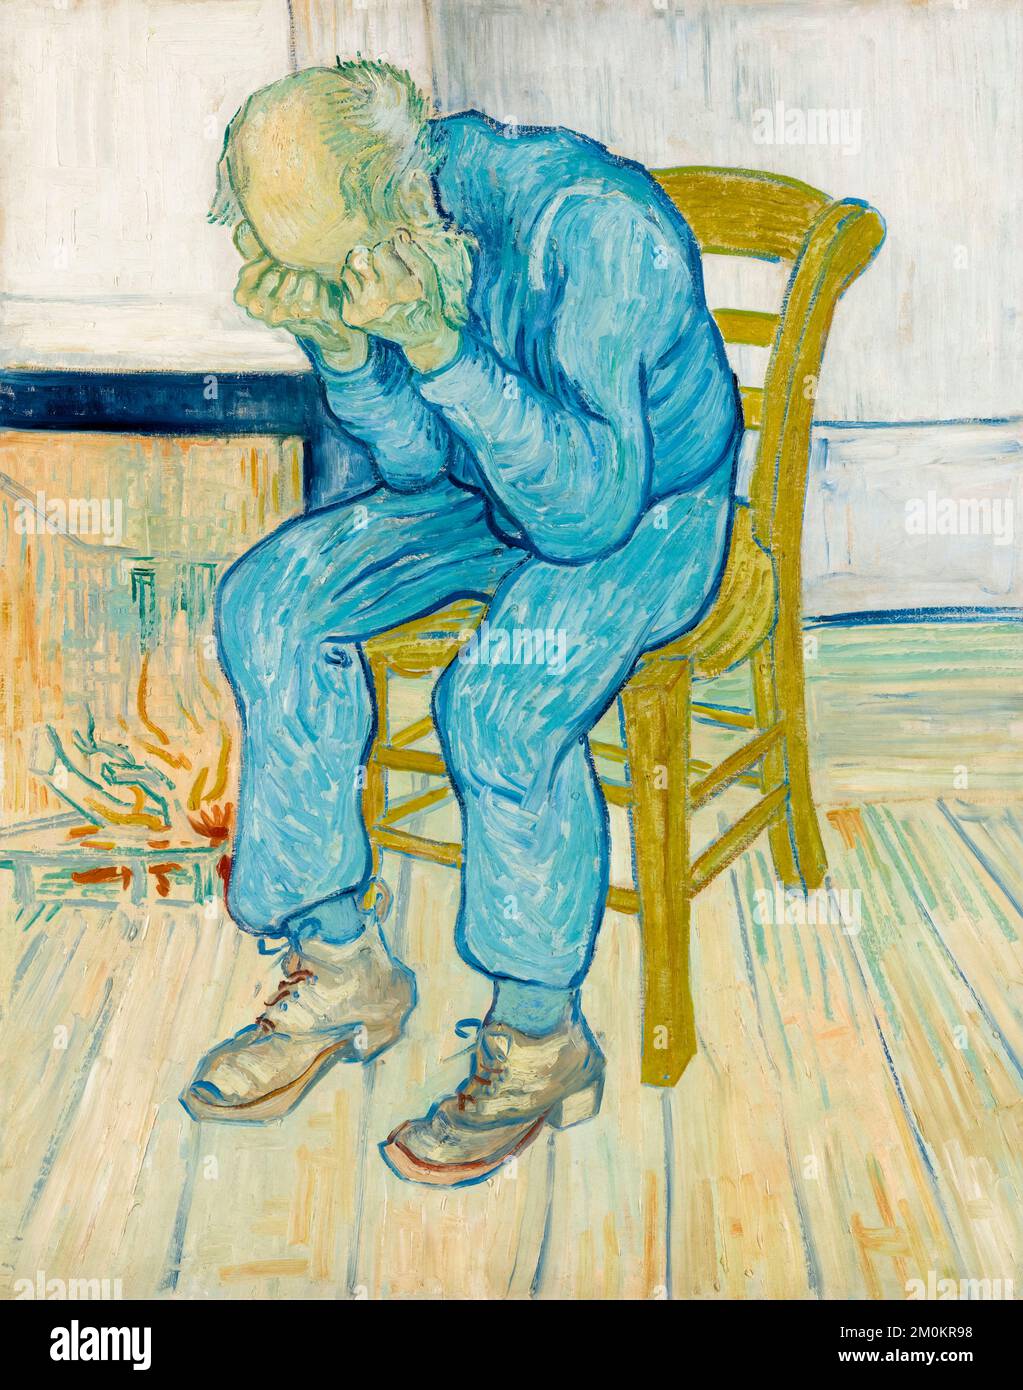 Vincent van Gogh, Sorrowing old man (At Eternity's Gate), painting in oil on canvas, 1890 Stock Photo